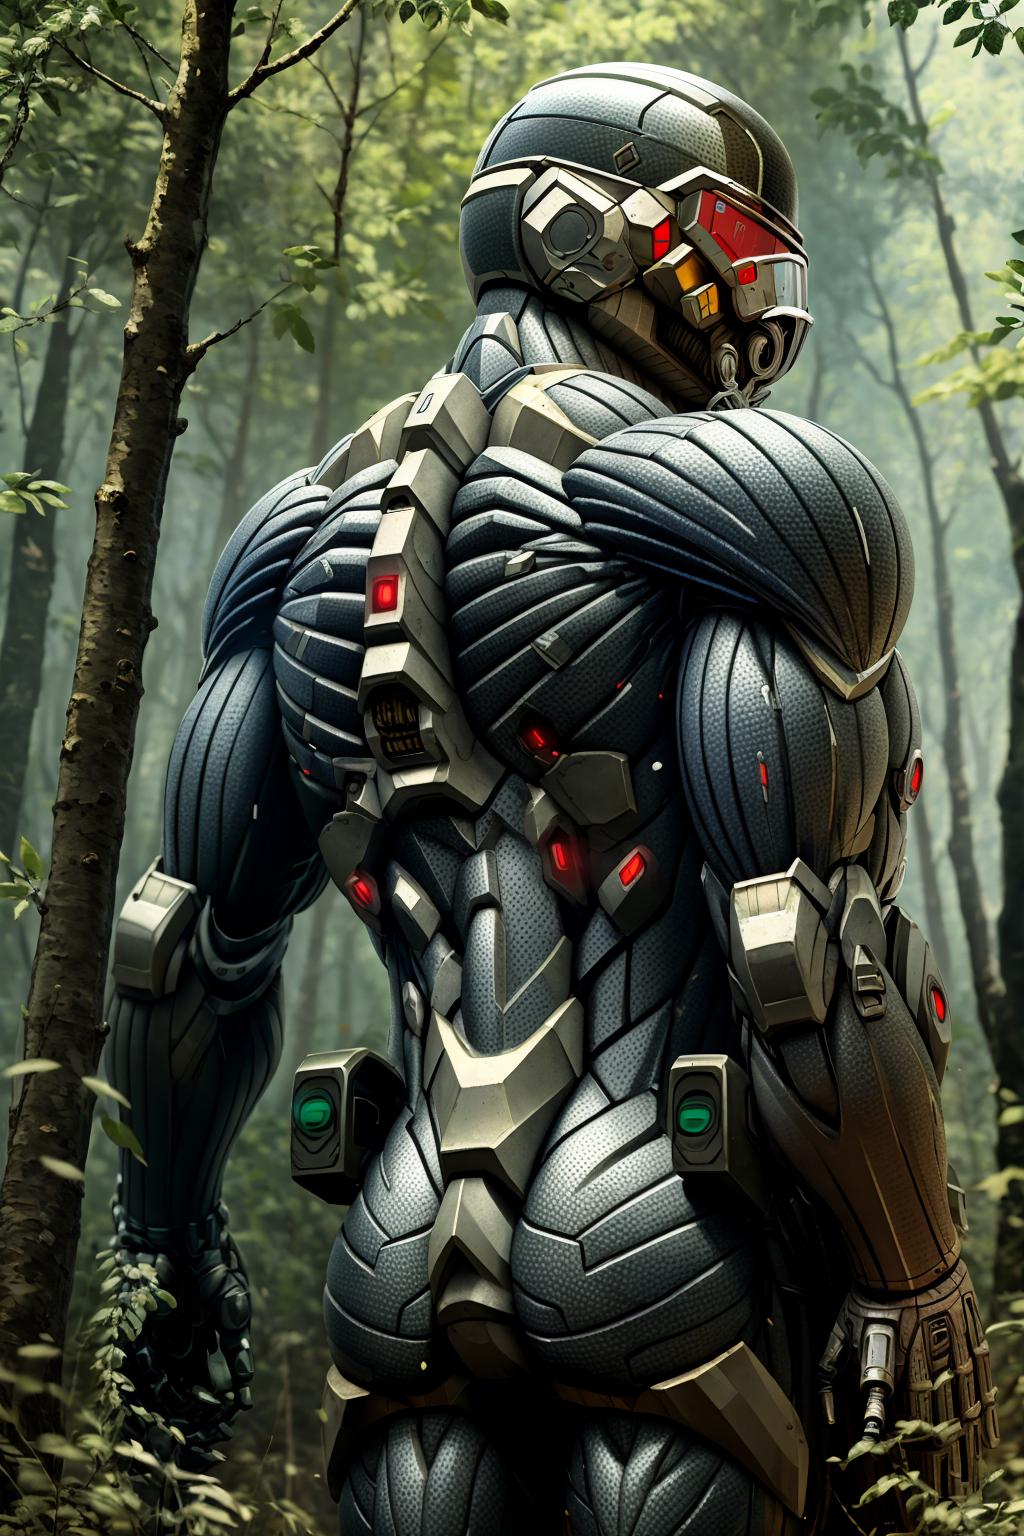 Futuristic Robot with Green Circuitry in Wooded Area